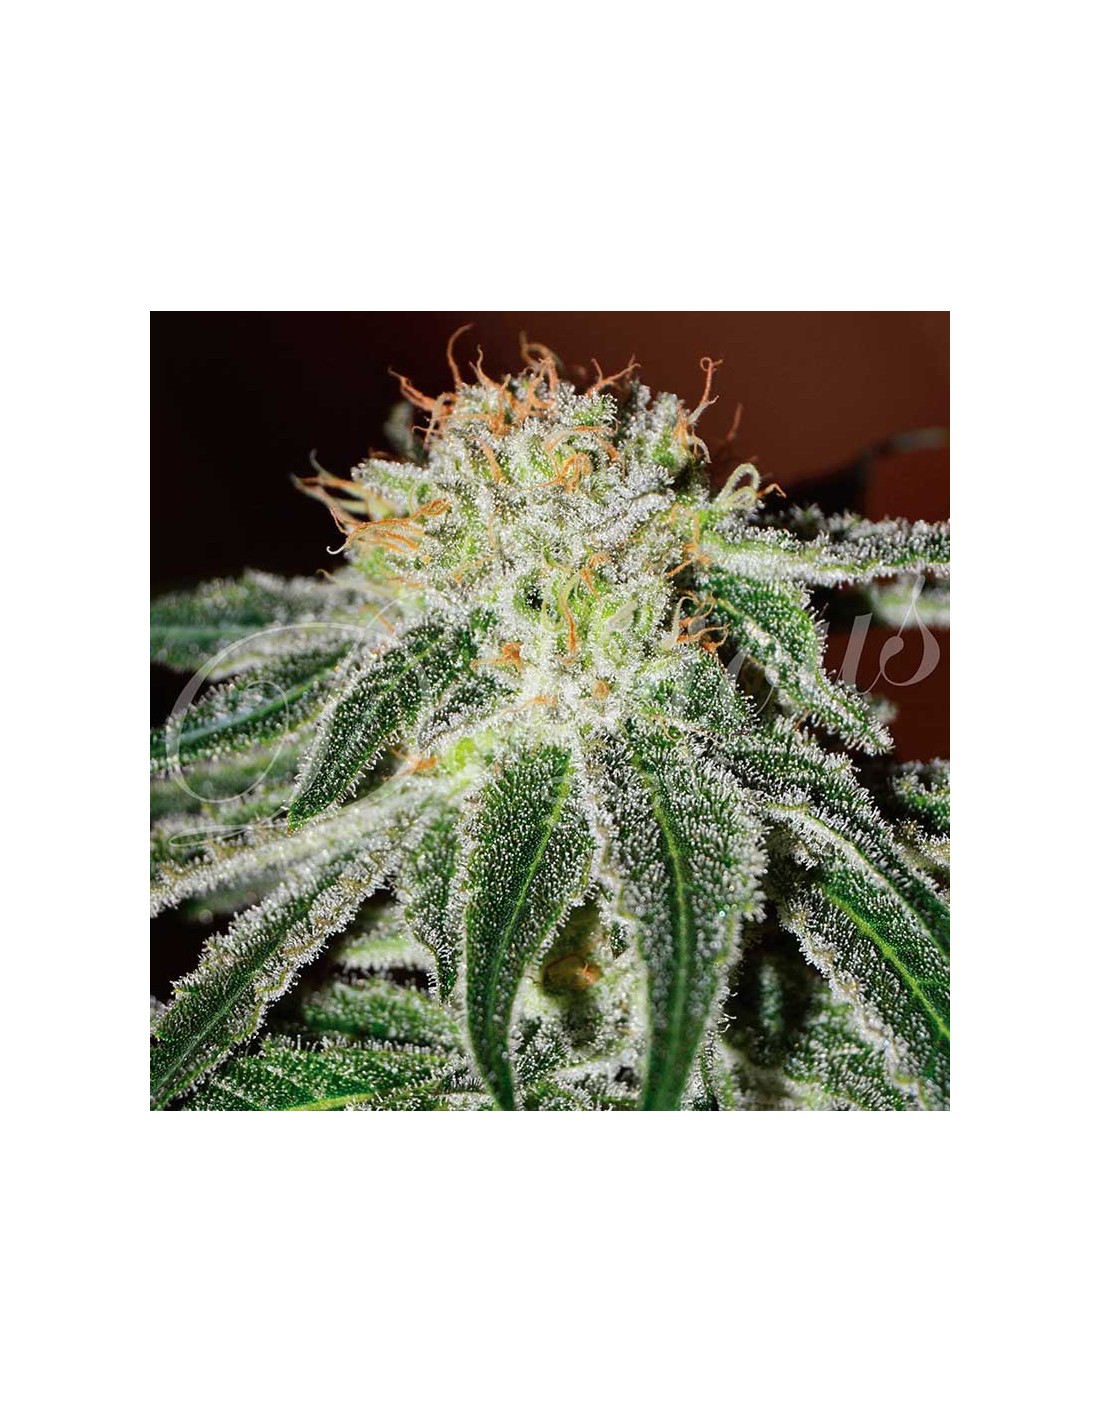 Black Russian (Delicious Seeds) Feminized Seeds | On Sale!